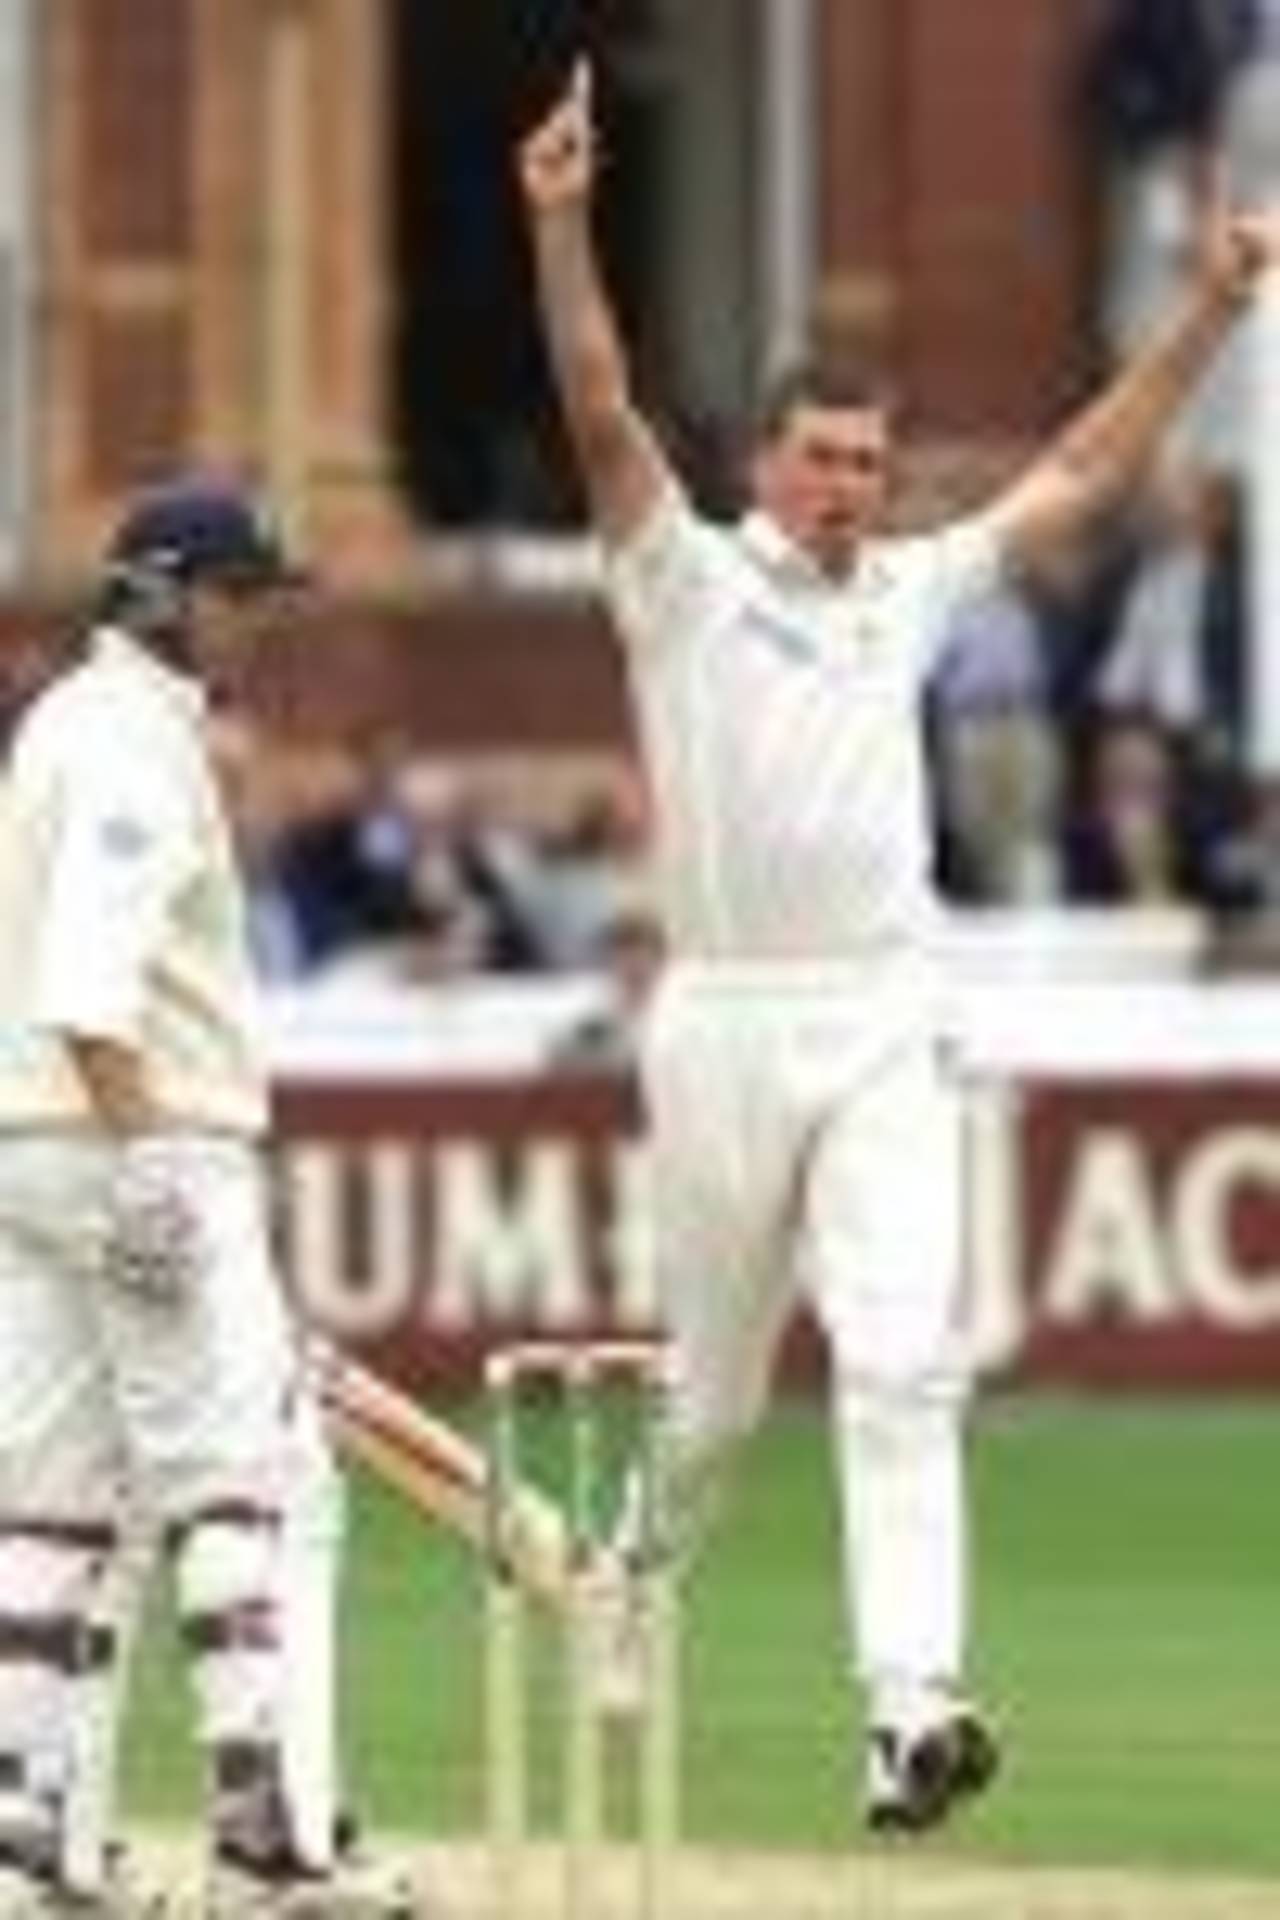 19 Jul 2001: Glenn McGrath of Australia celebrates trapping Michael Atherton of England leg before wicket during the match between England and Australia in the Second Npower Test at Lord's, London.